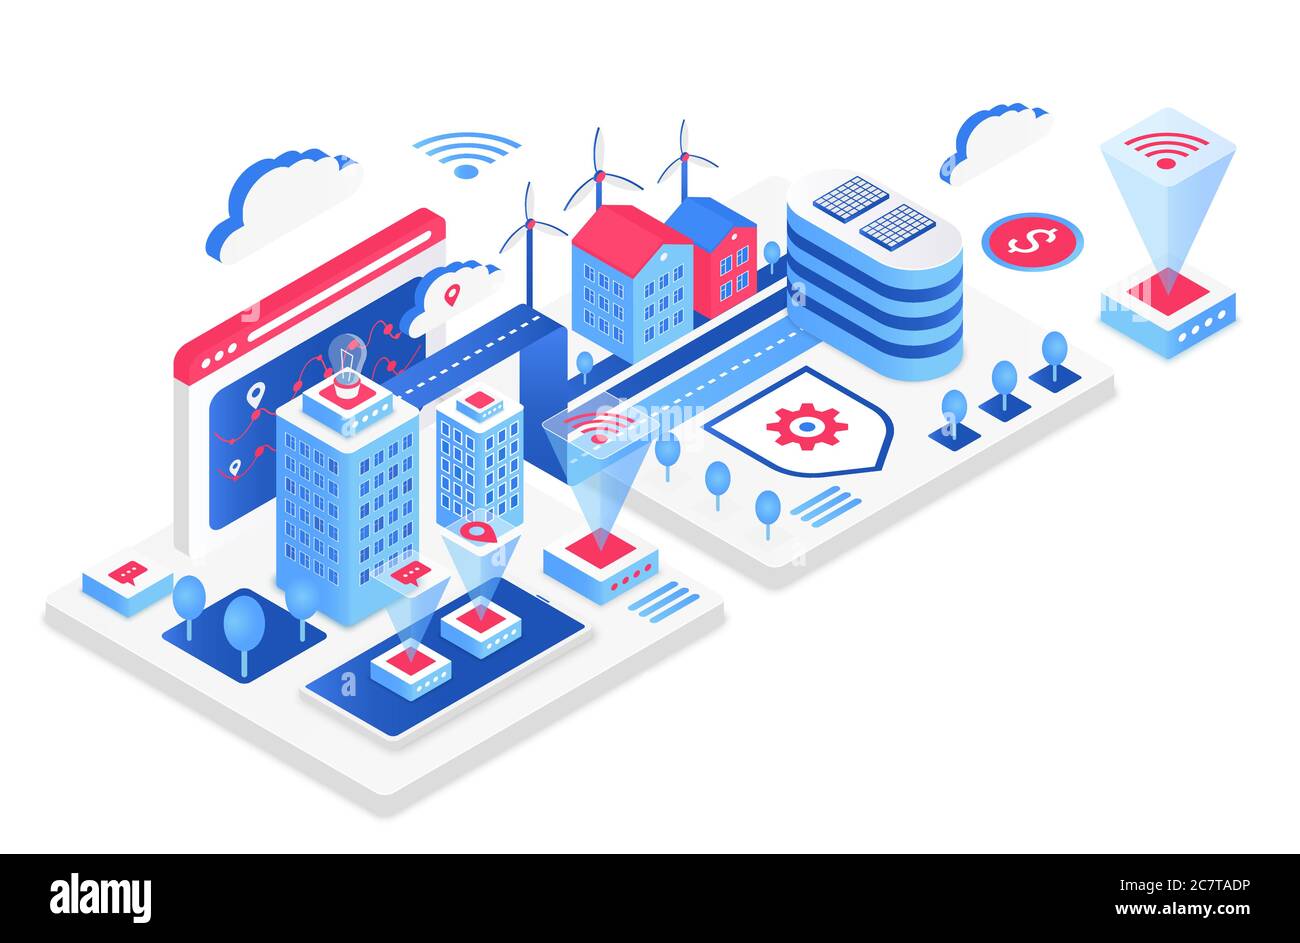 Smart city isometric vector illustration. White virtual cityscape. Internet of things and IT. Futuristic communication and infrastructure. Innovative technology cartoon conceptual design element Stock Vector